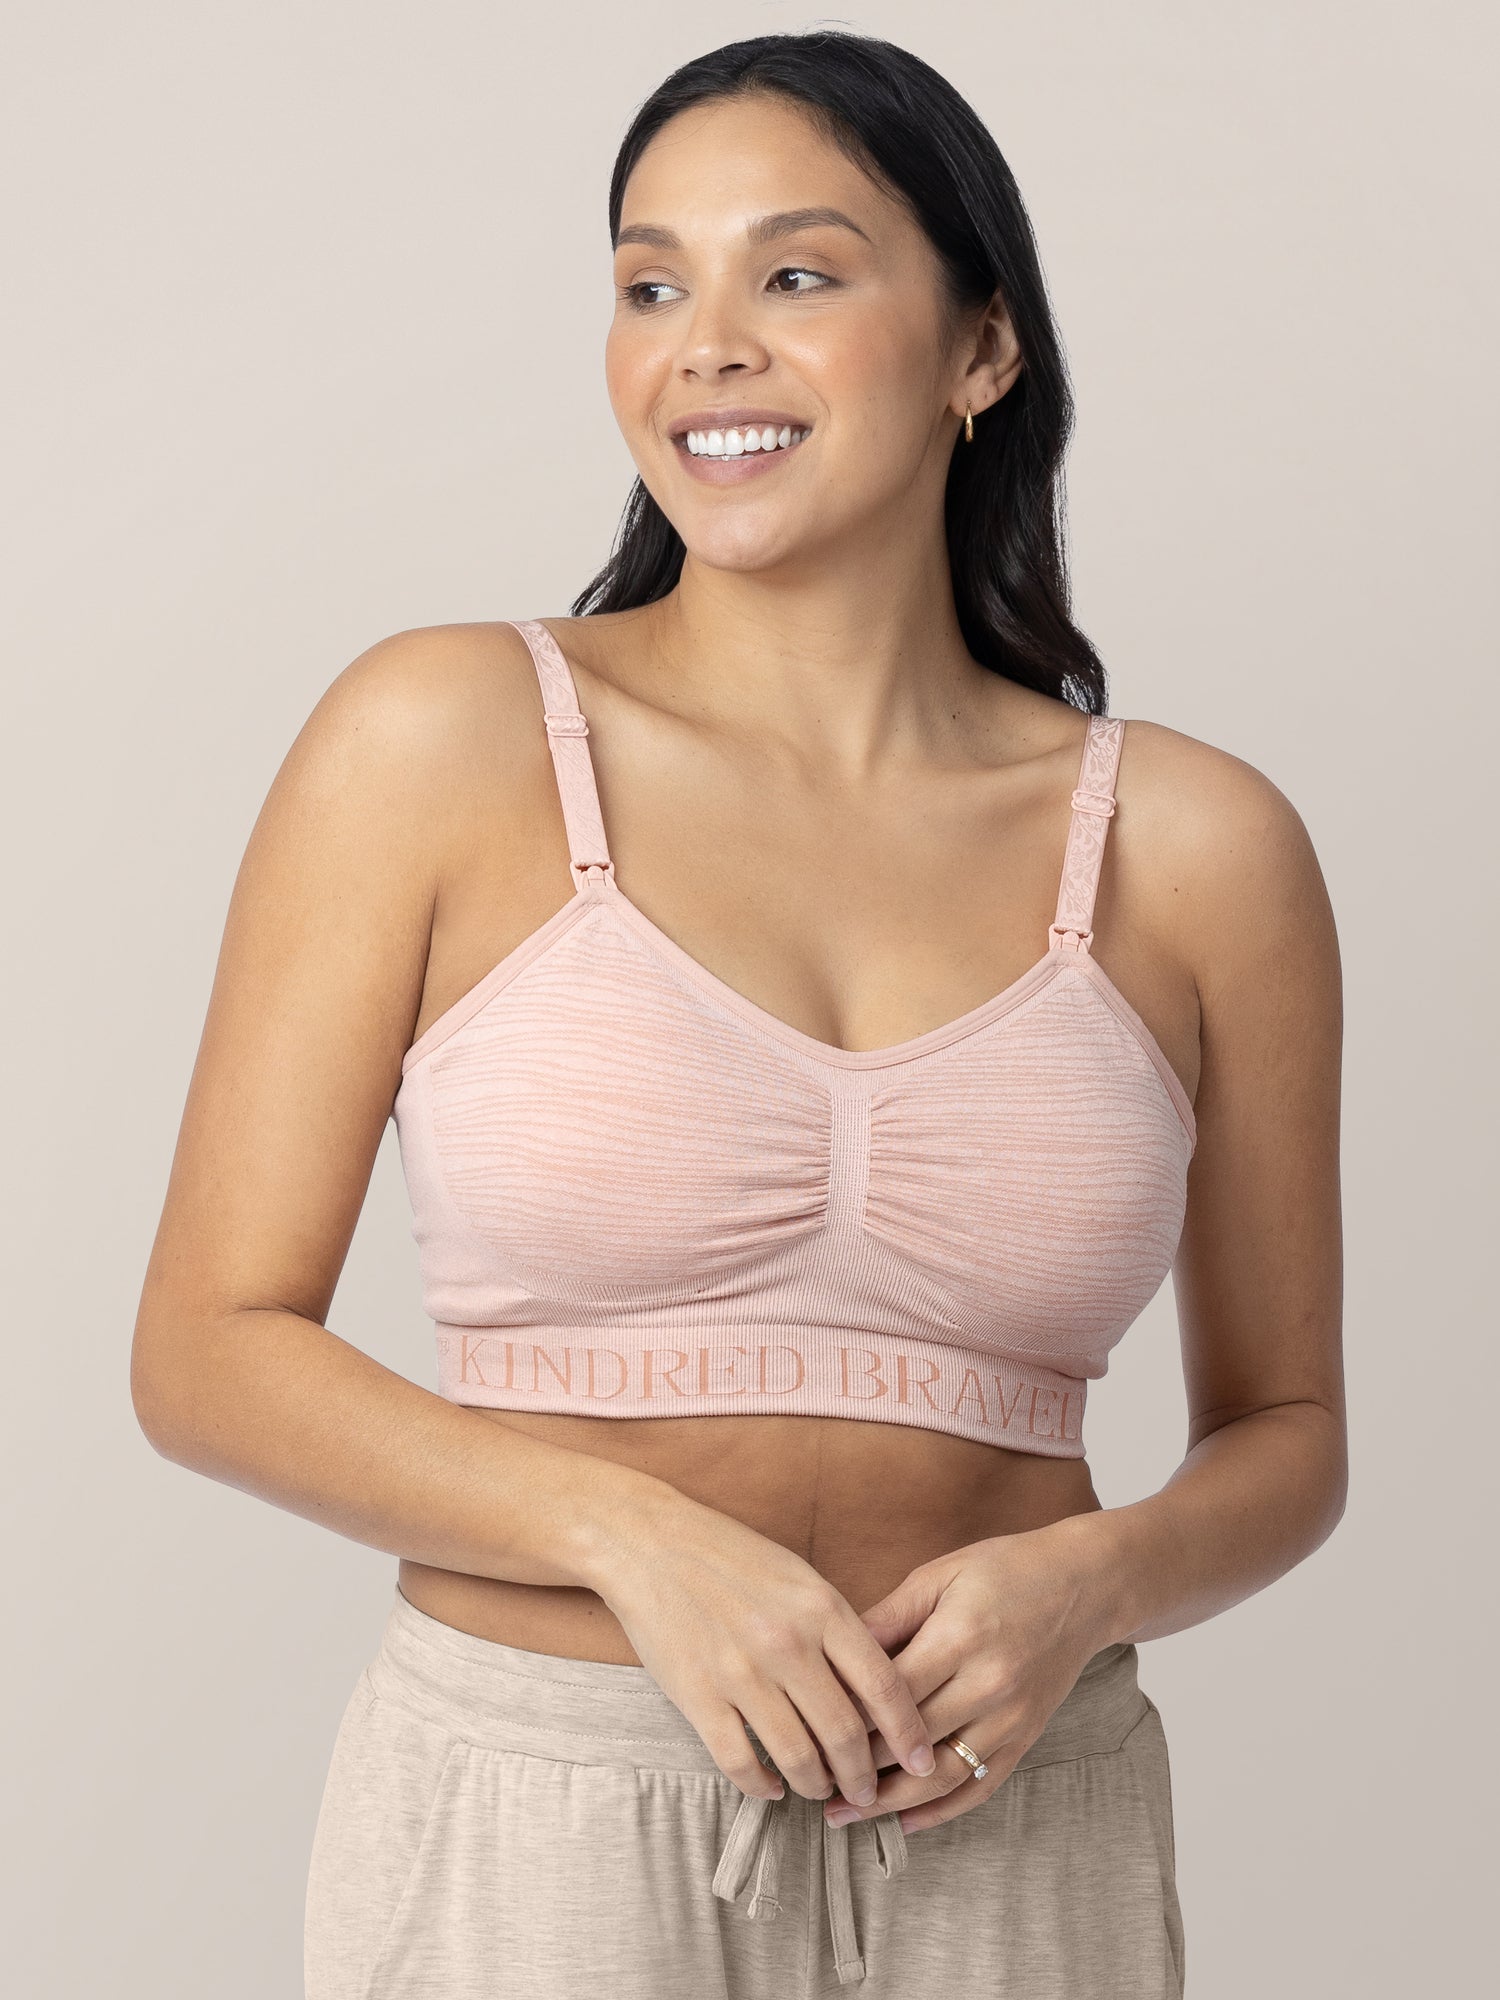 Kindred By Kindred Bravely Women's Pumping + Nursing Hands Free Bra - Soft  Pink Xxl : Target